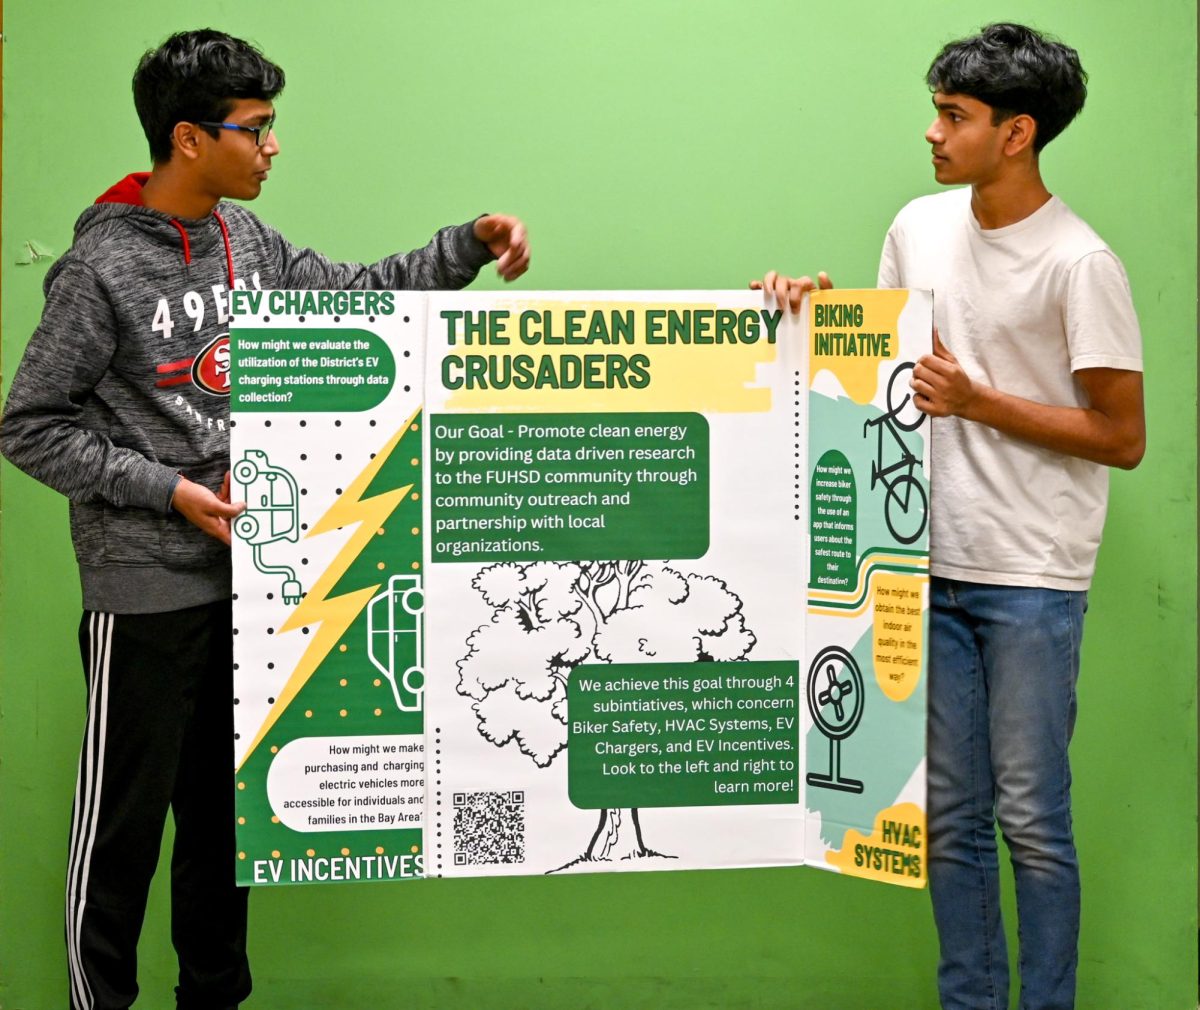 Batchu and Kulkarni hold their poster board, depicting their various clean energy initiatives.